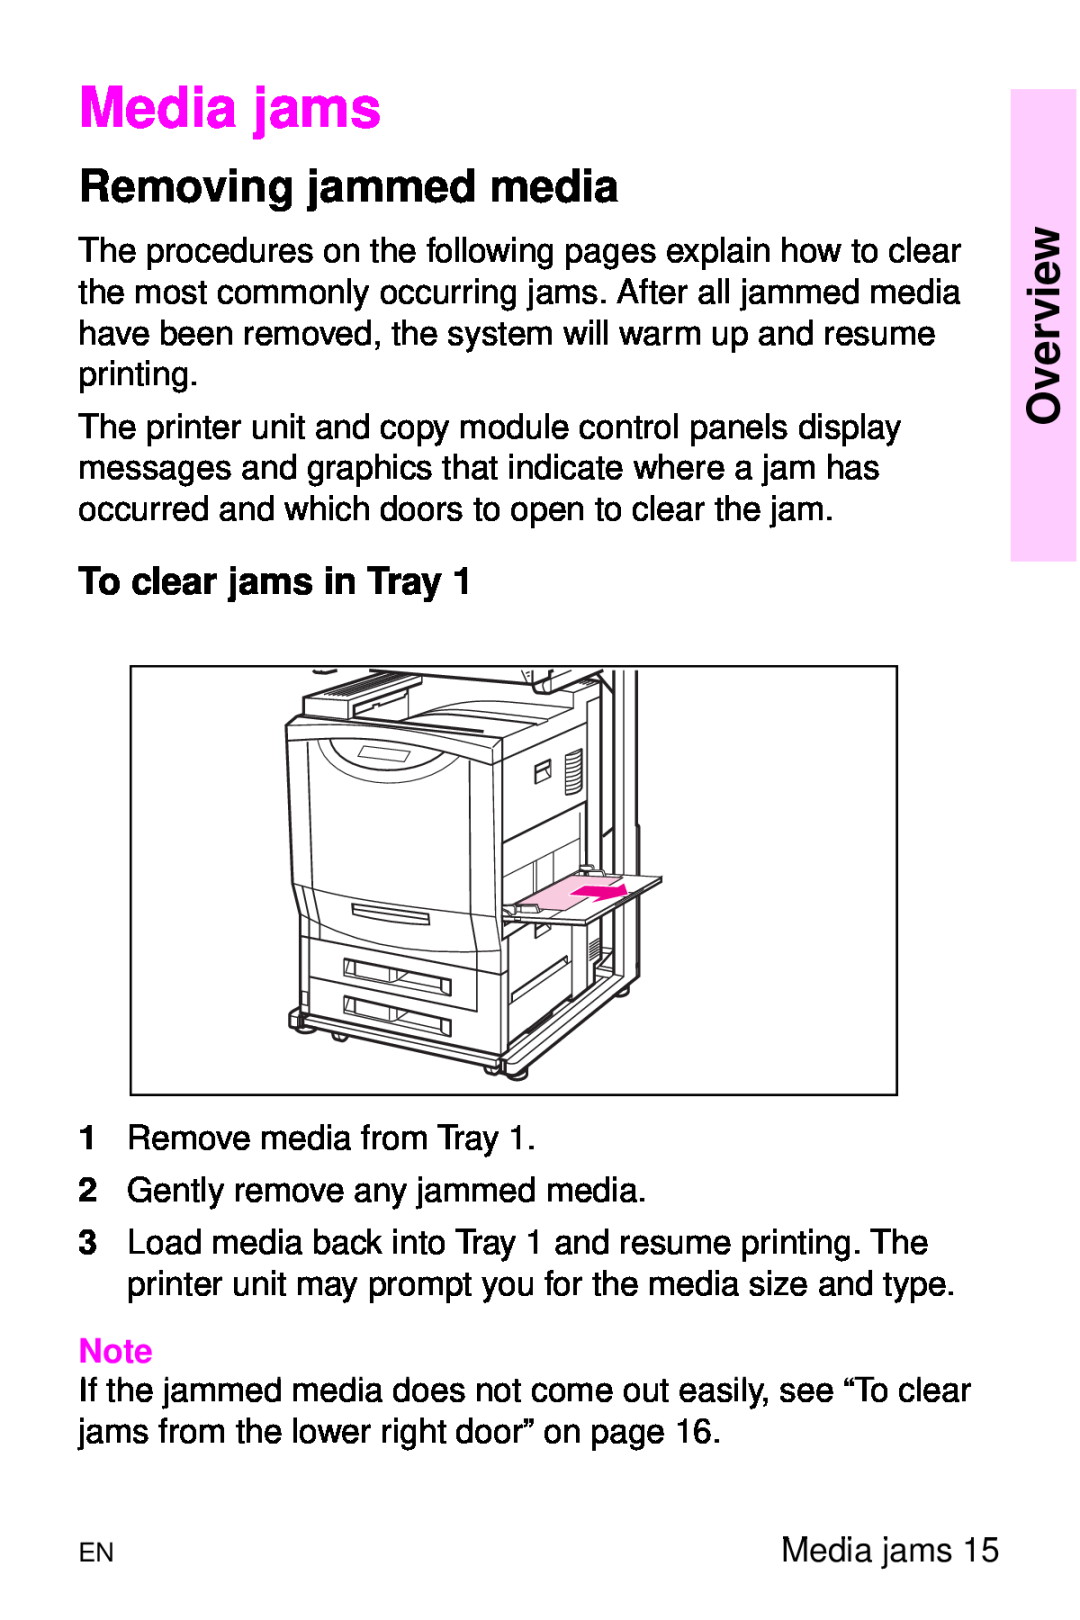 HP 8000 s manual Media jams, Removing jammed media, To clear jams in Tray, Overview 